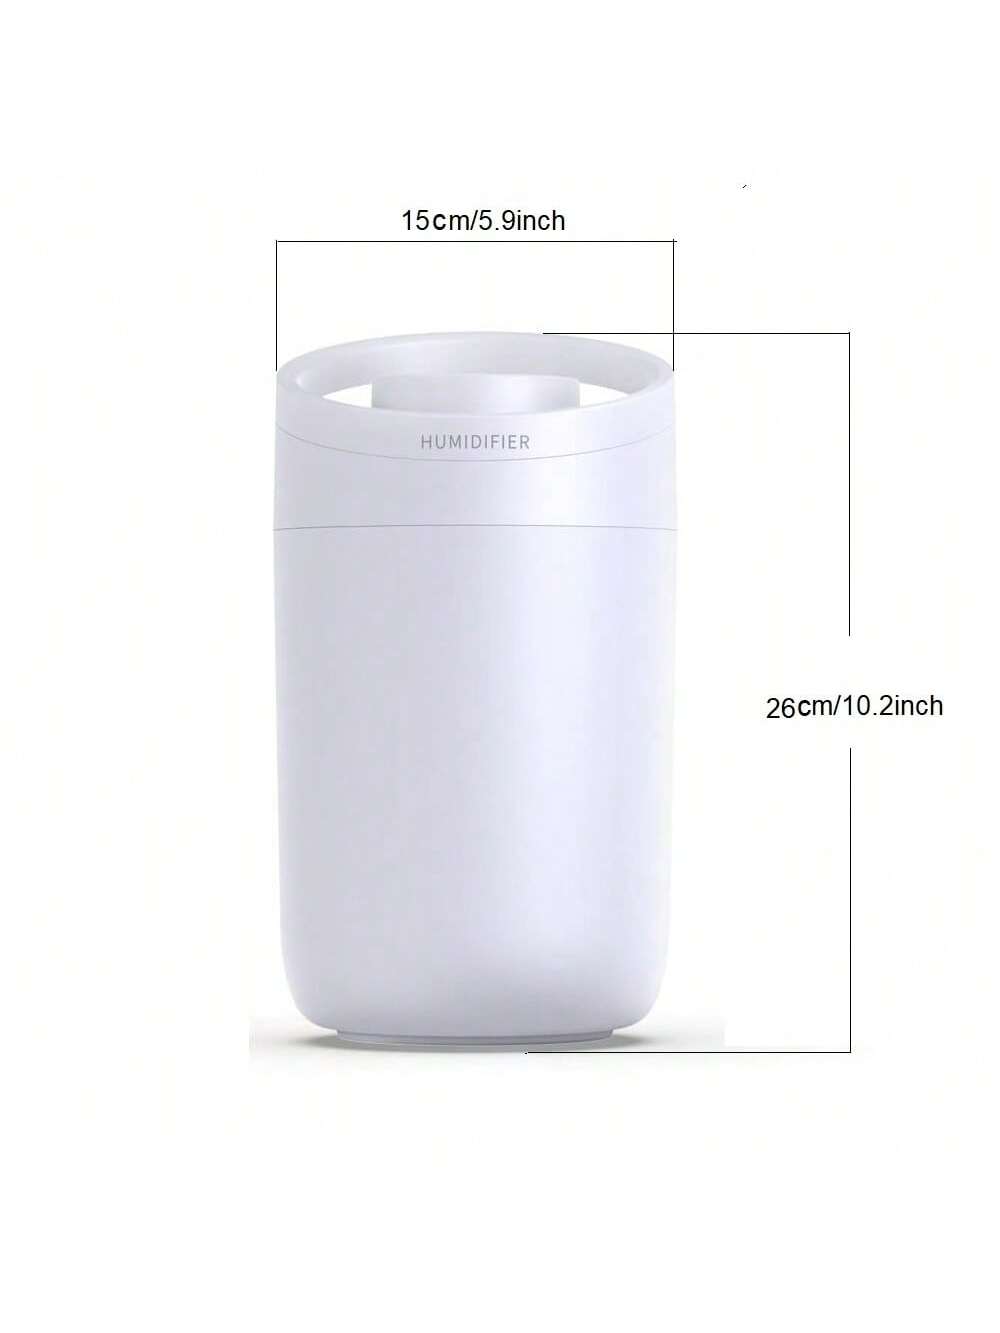 1pc Usb Plug 3000ml Large Capacity Double Nozzle Humidifier X11, Directly Add Water From The Top, Suitable For Room, Plant Room-White-9